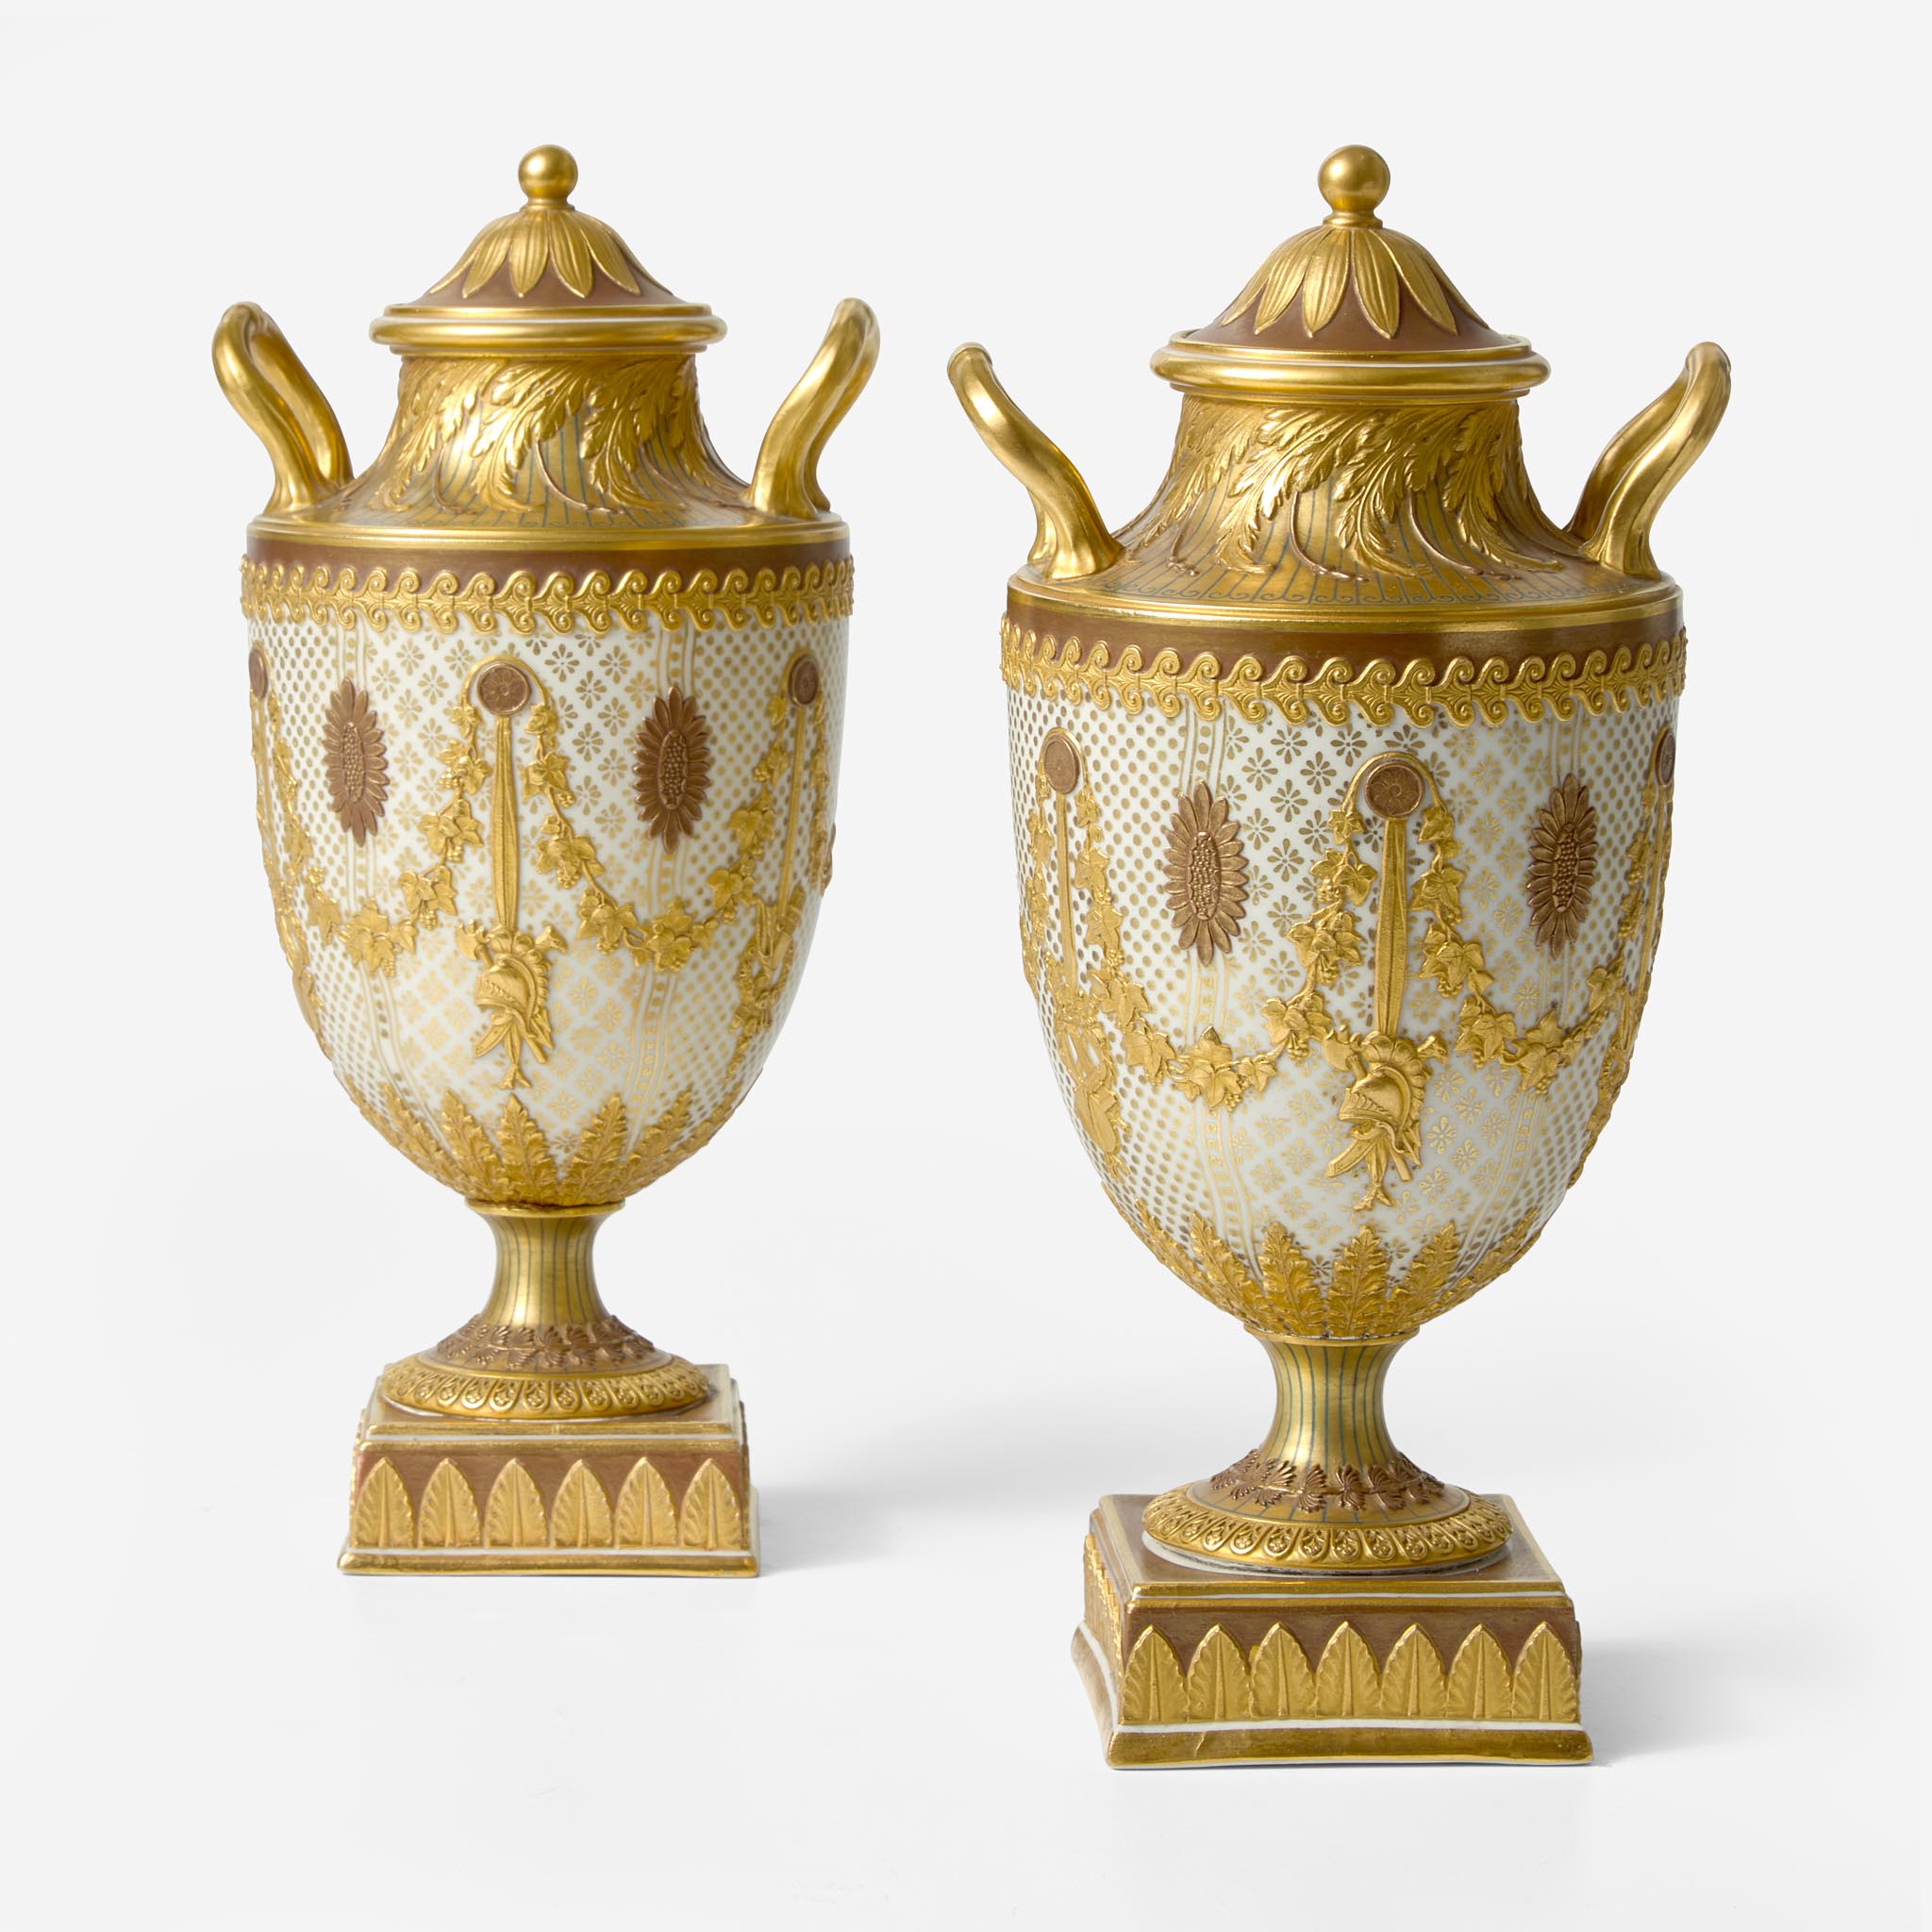 A Pair of Wedgwood Gilded and Bronzed Queensware Vases with Covers UK, 1880s